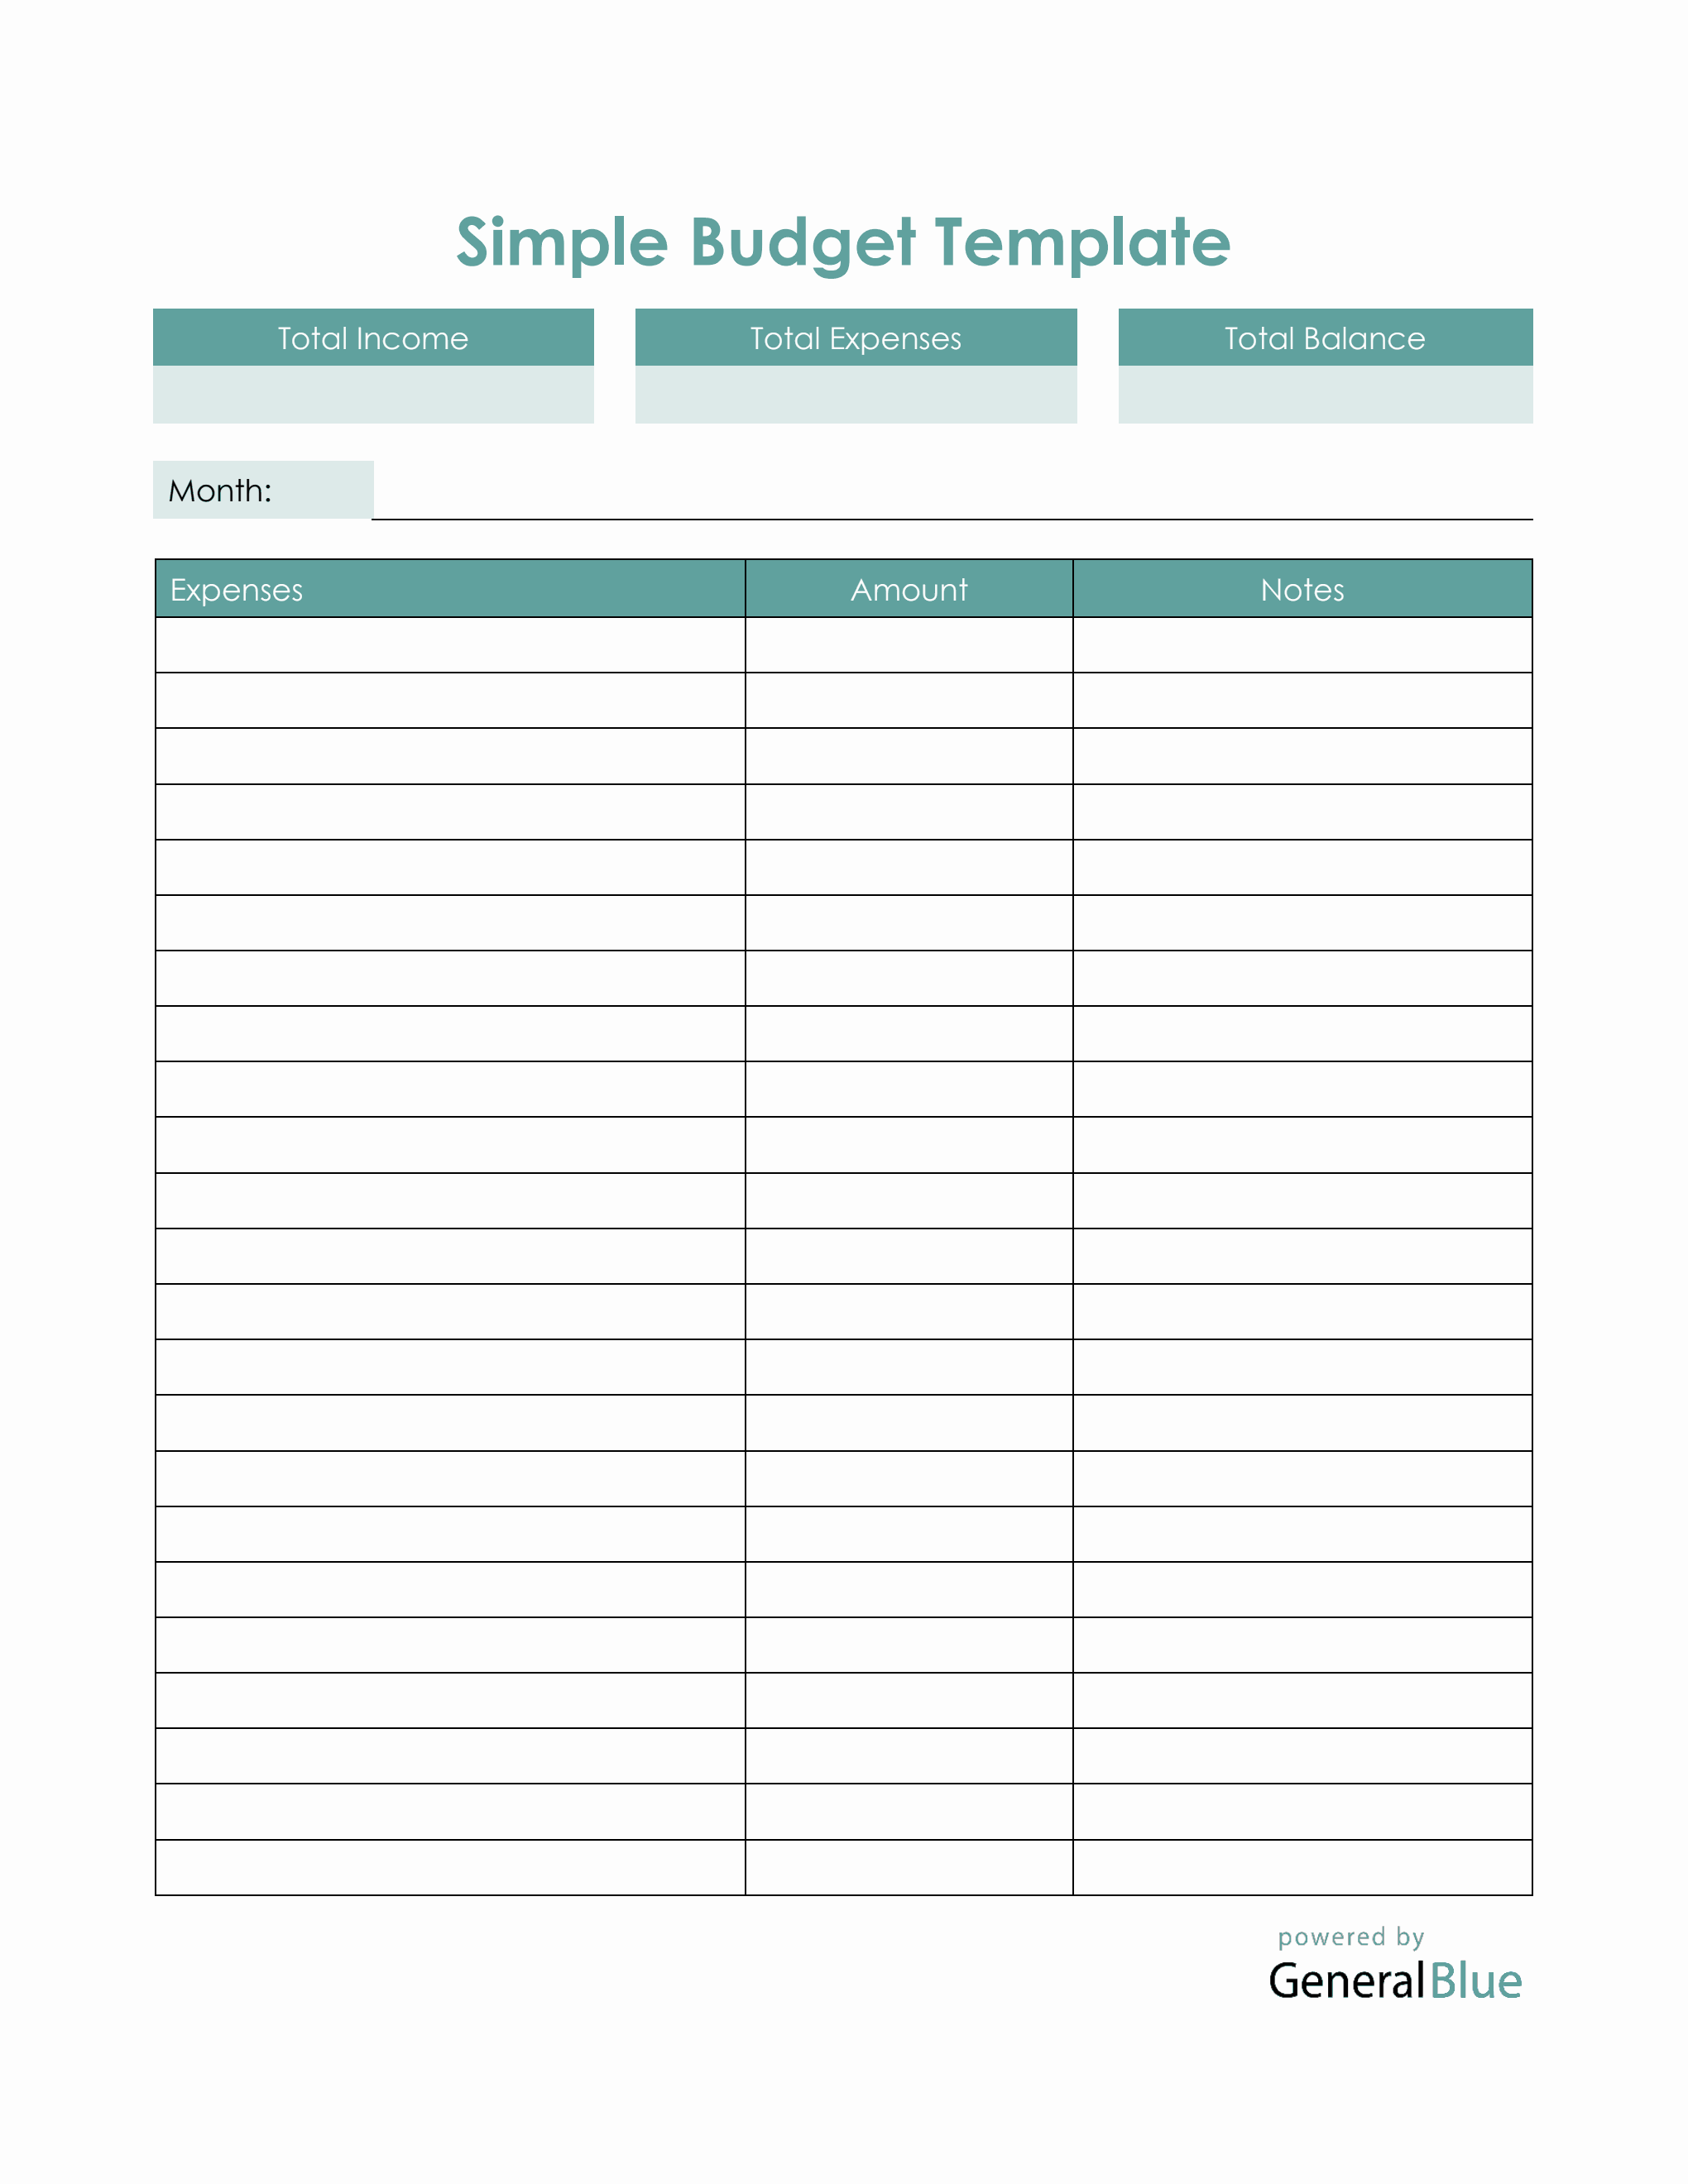 simple-budget-template-in-pdf